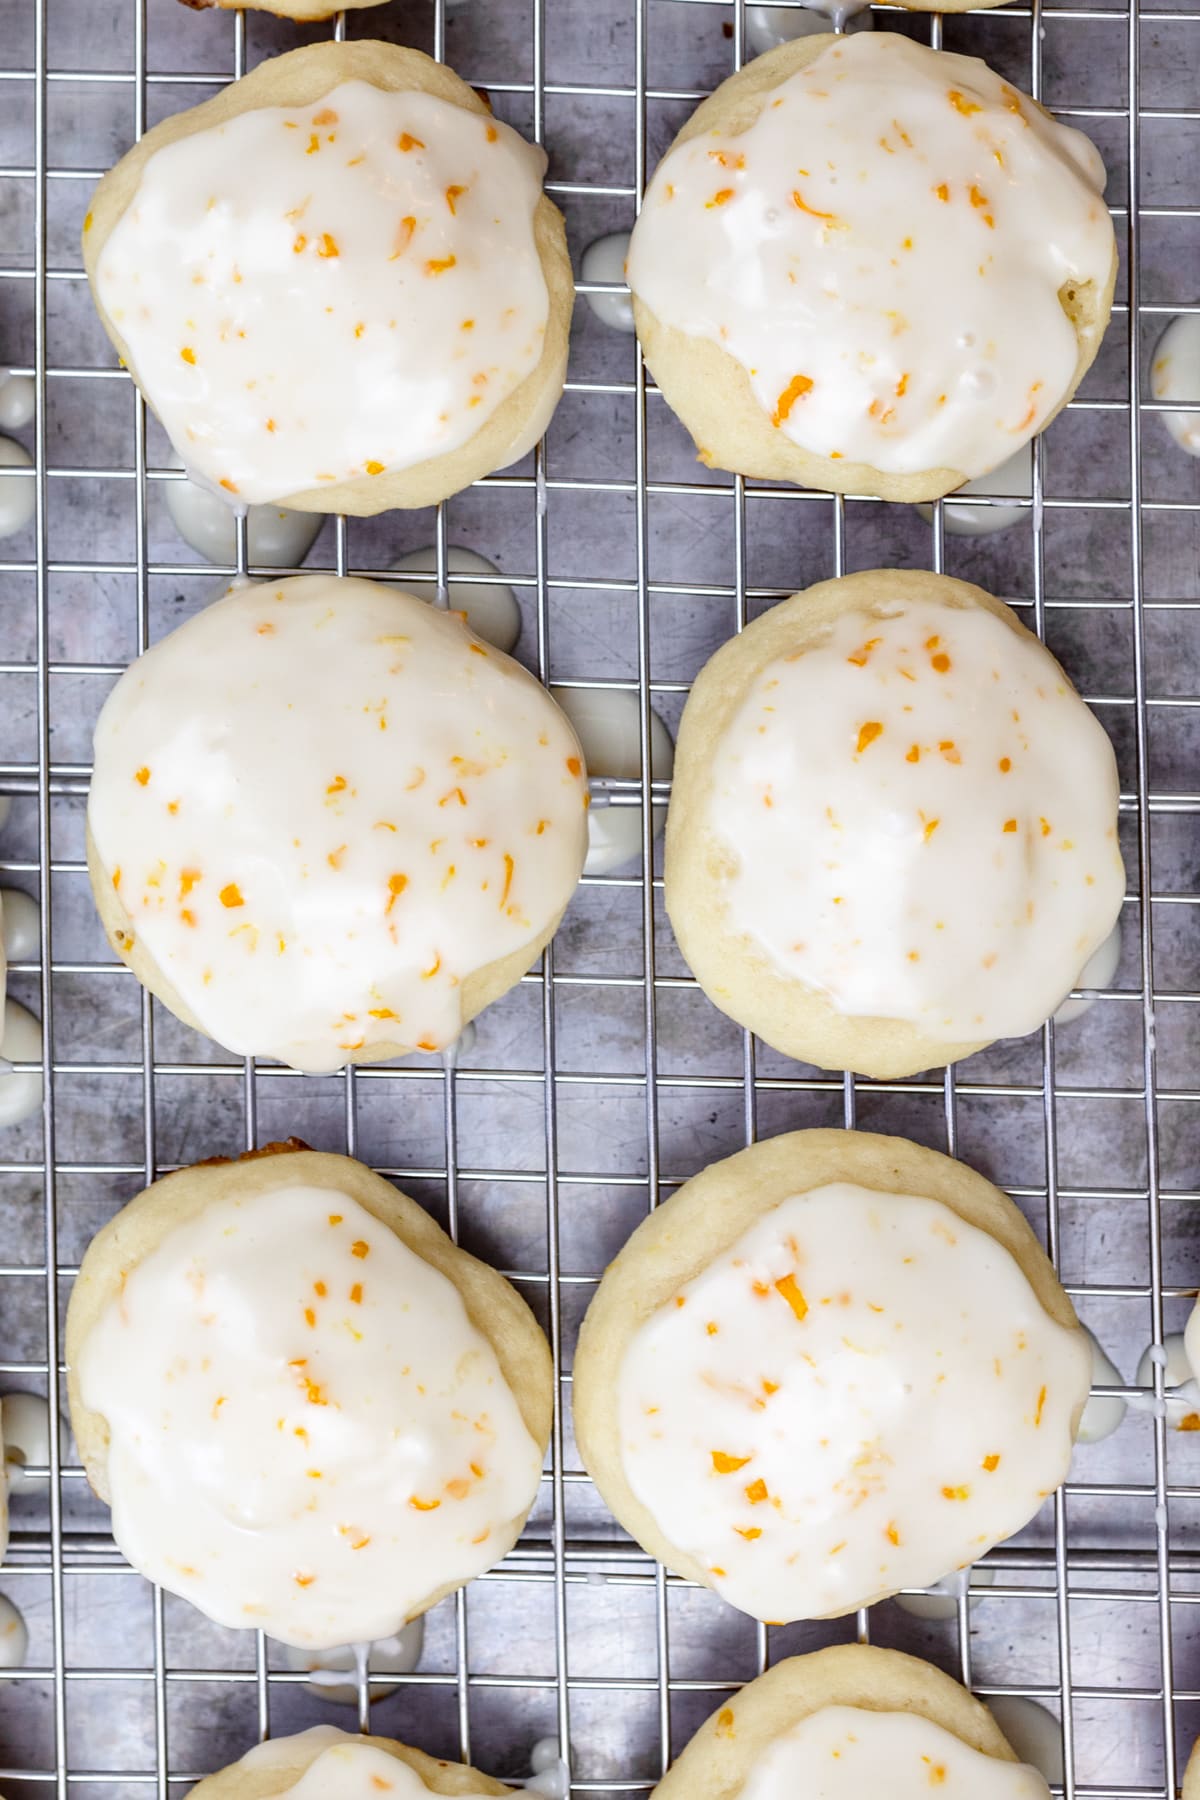 Top view of lemon ricotta cookies on a wire rack.